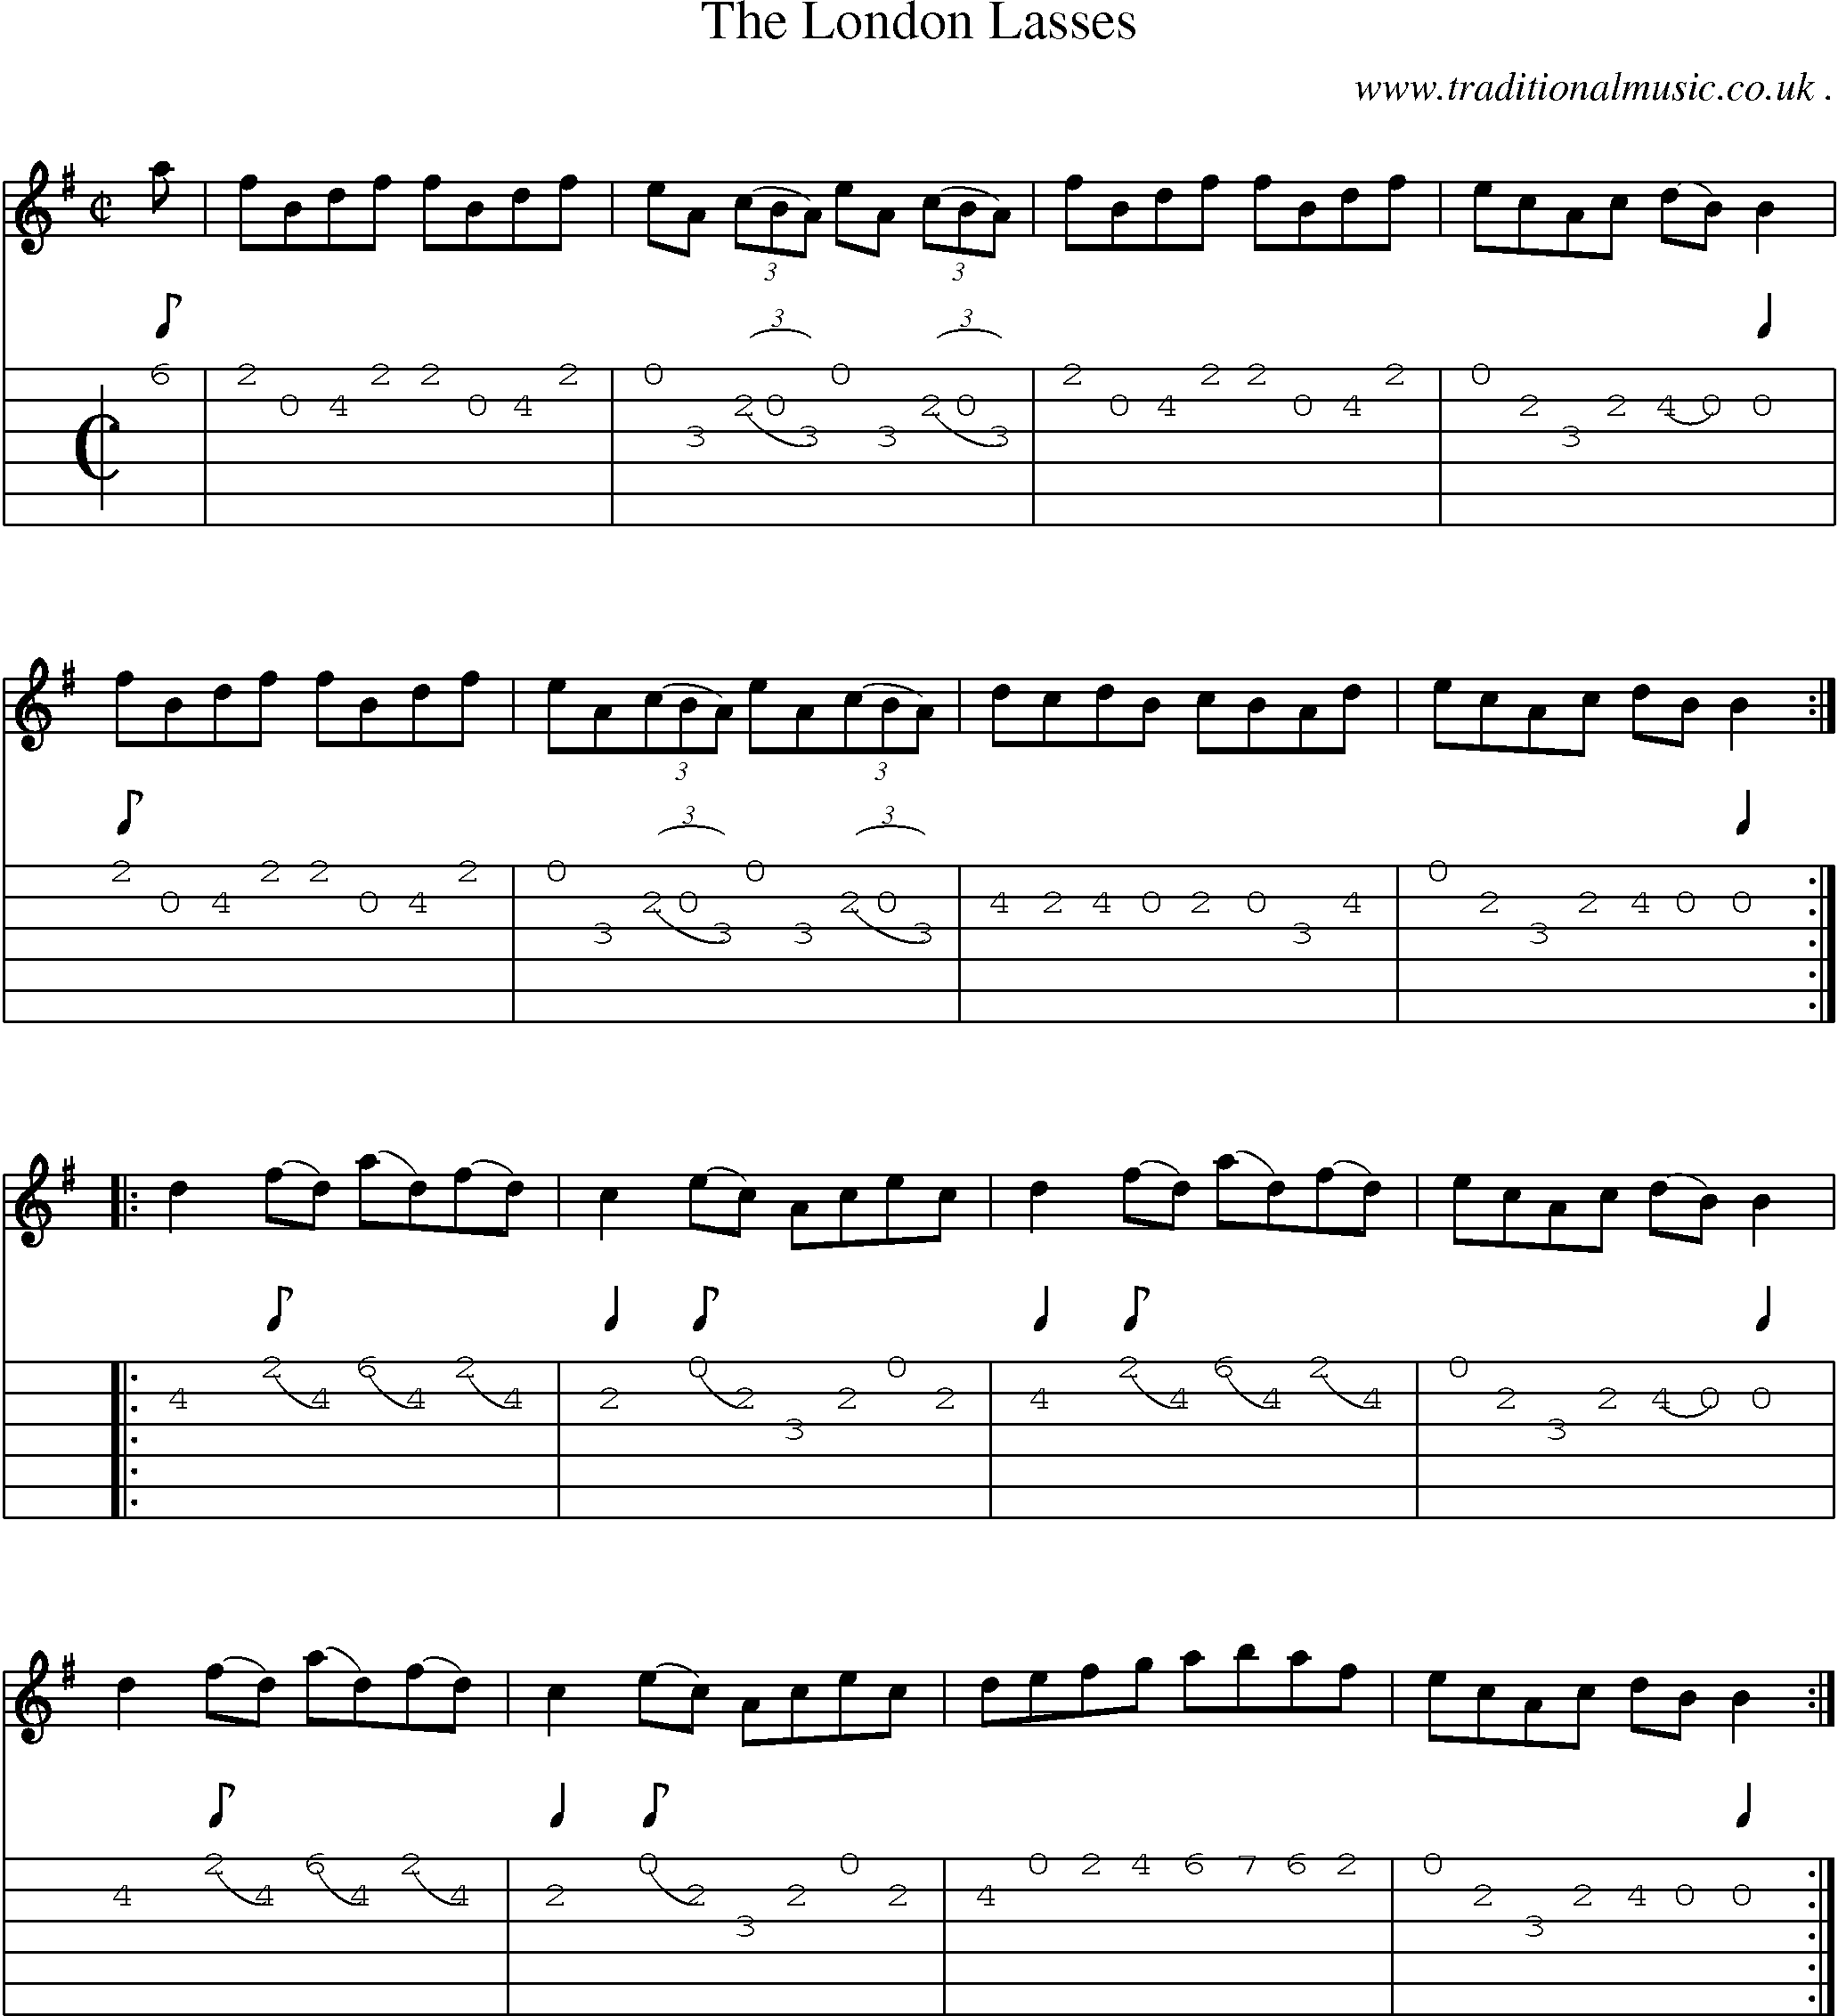 Sheet-Music and Guitar Tabs for The London Lasses